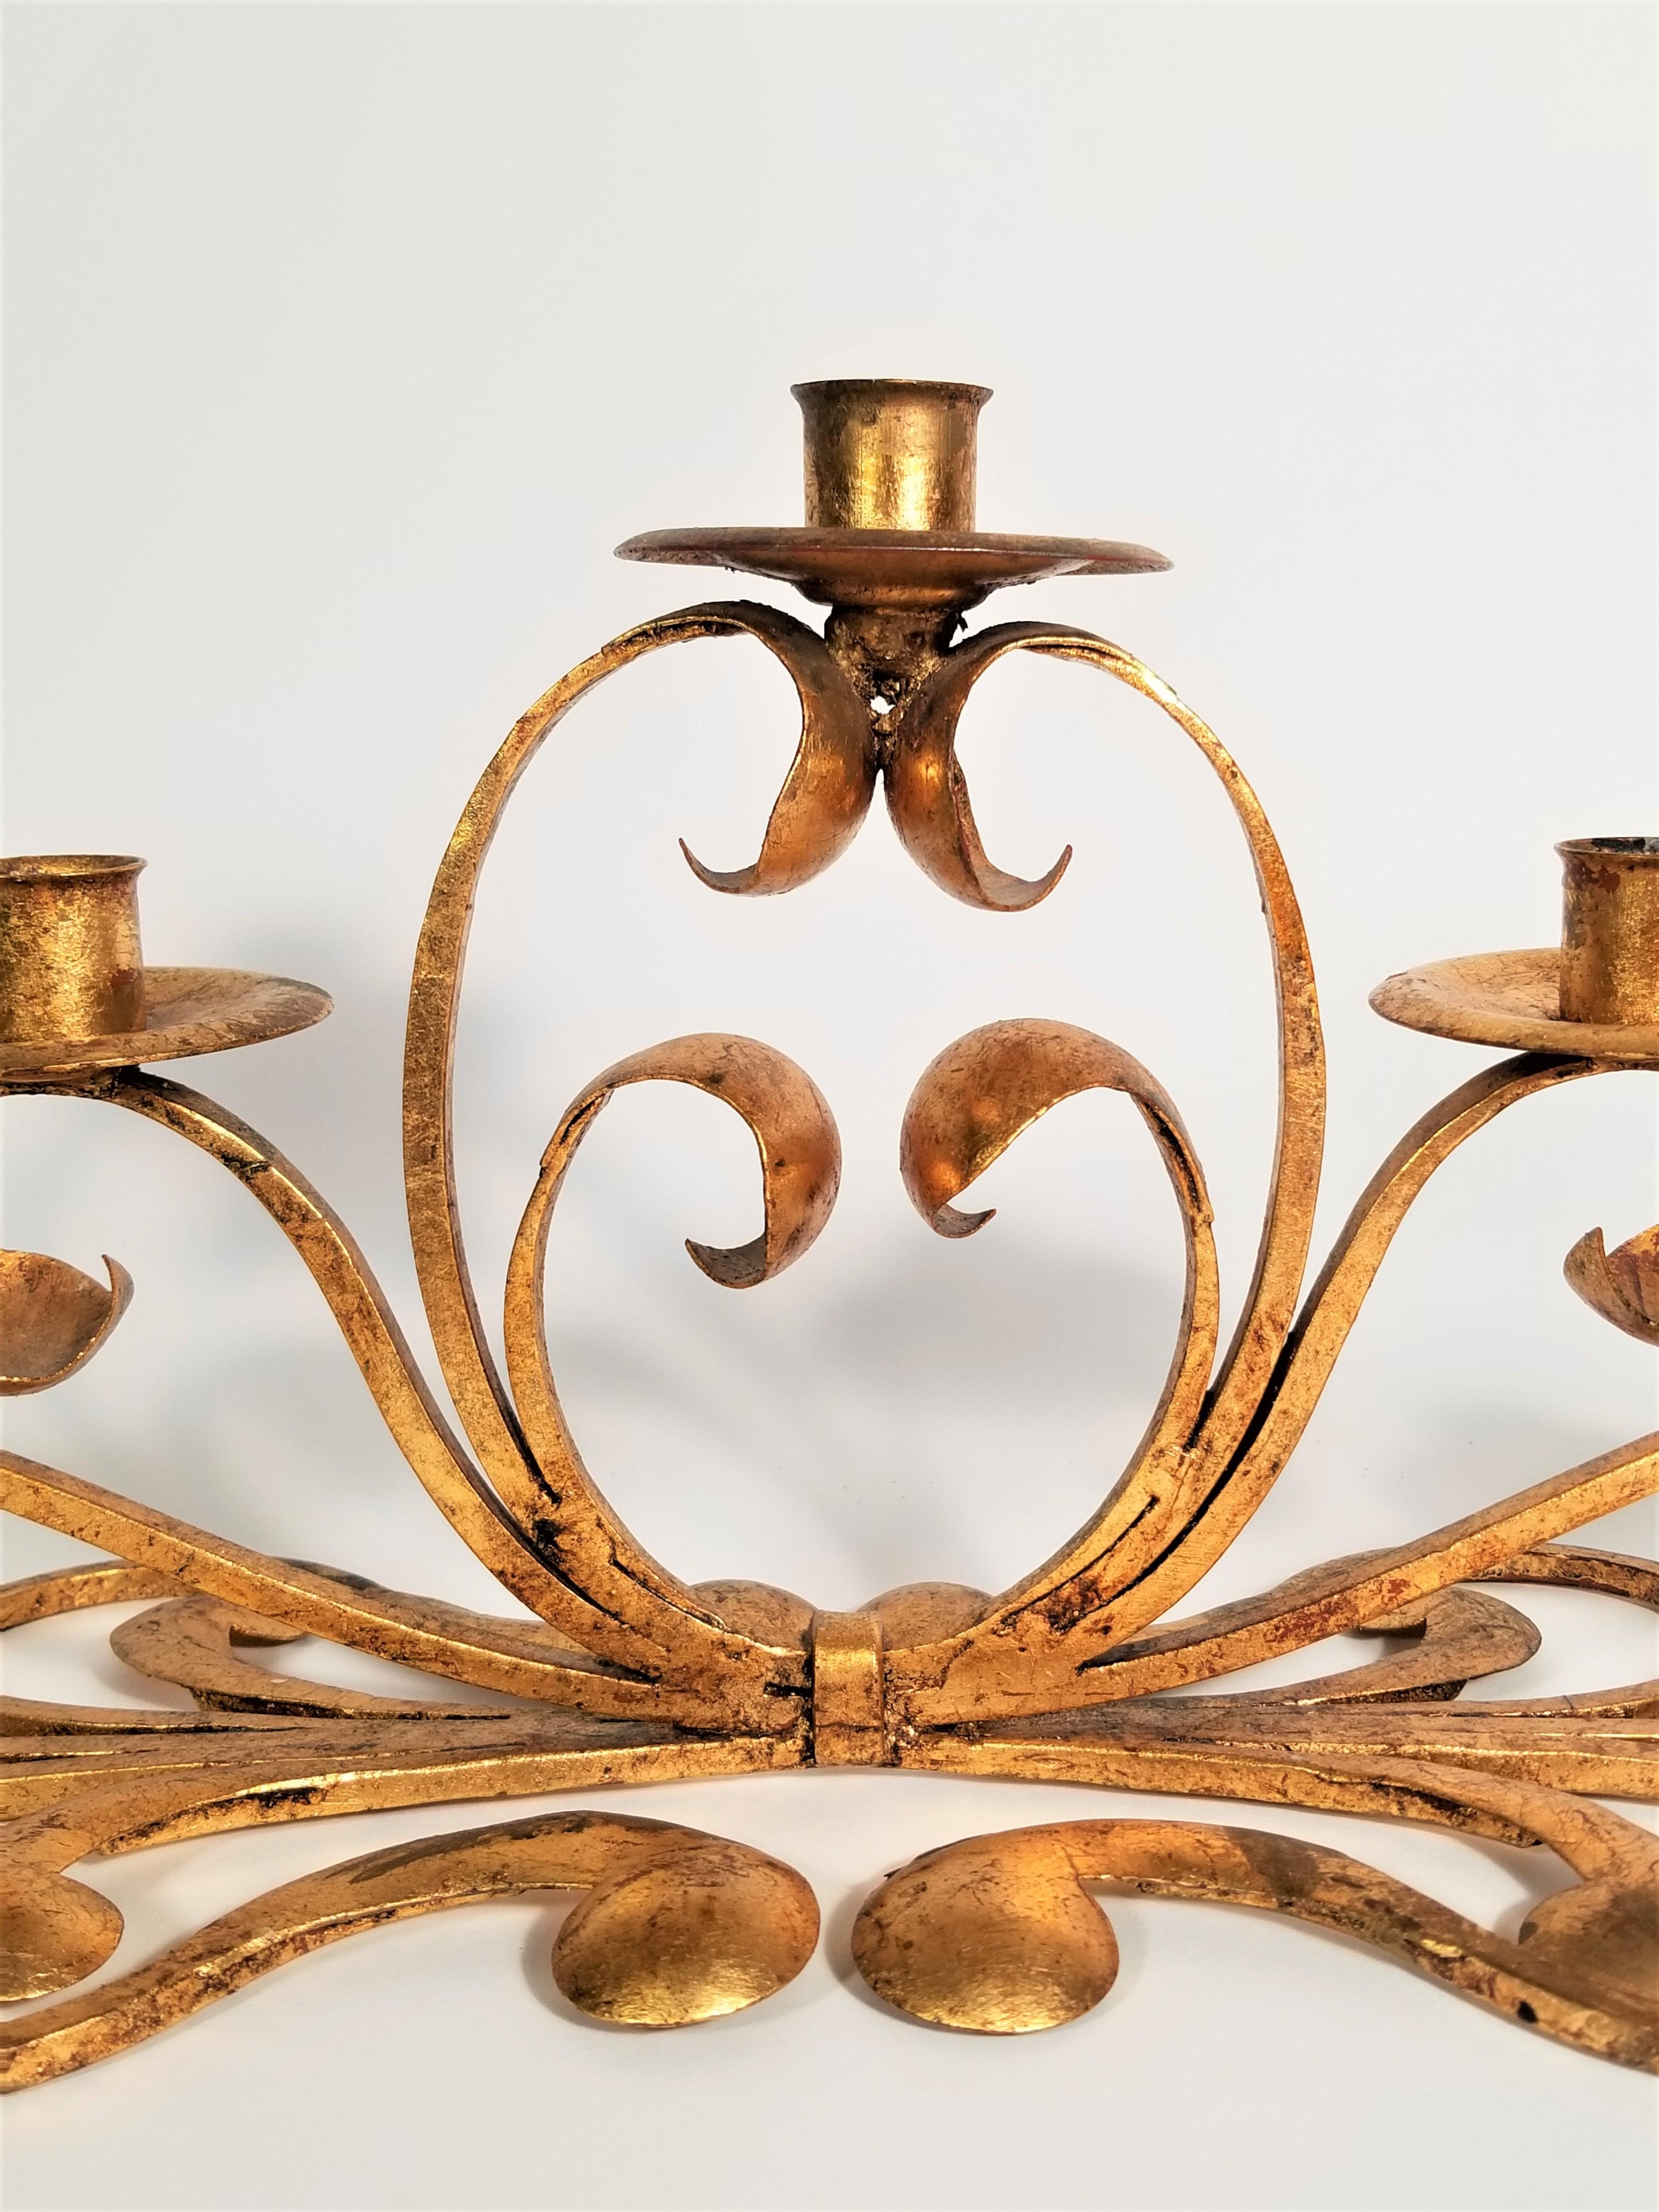 Italian Signed S. Salvadori  Gilded Candelabra, 1950s  Made in Italy For Sale 2